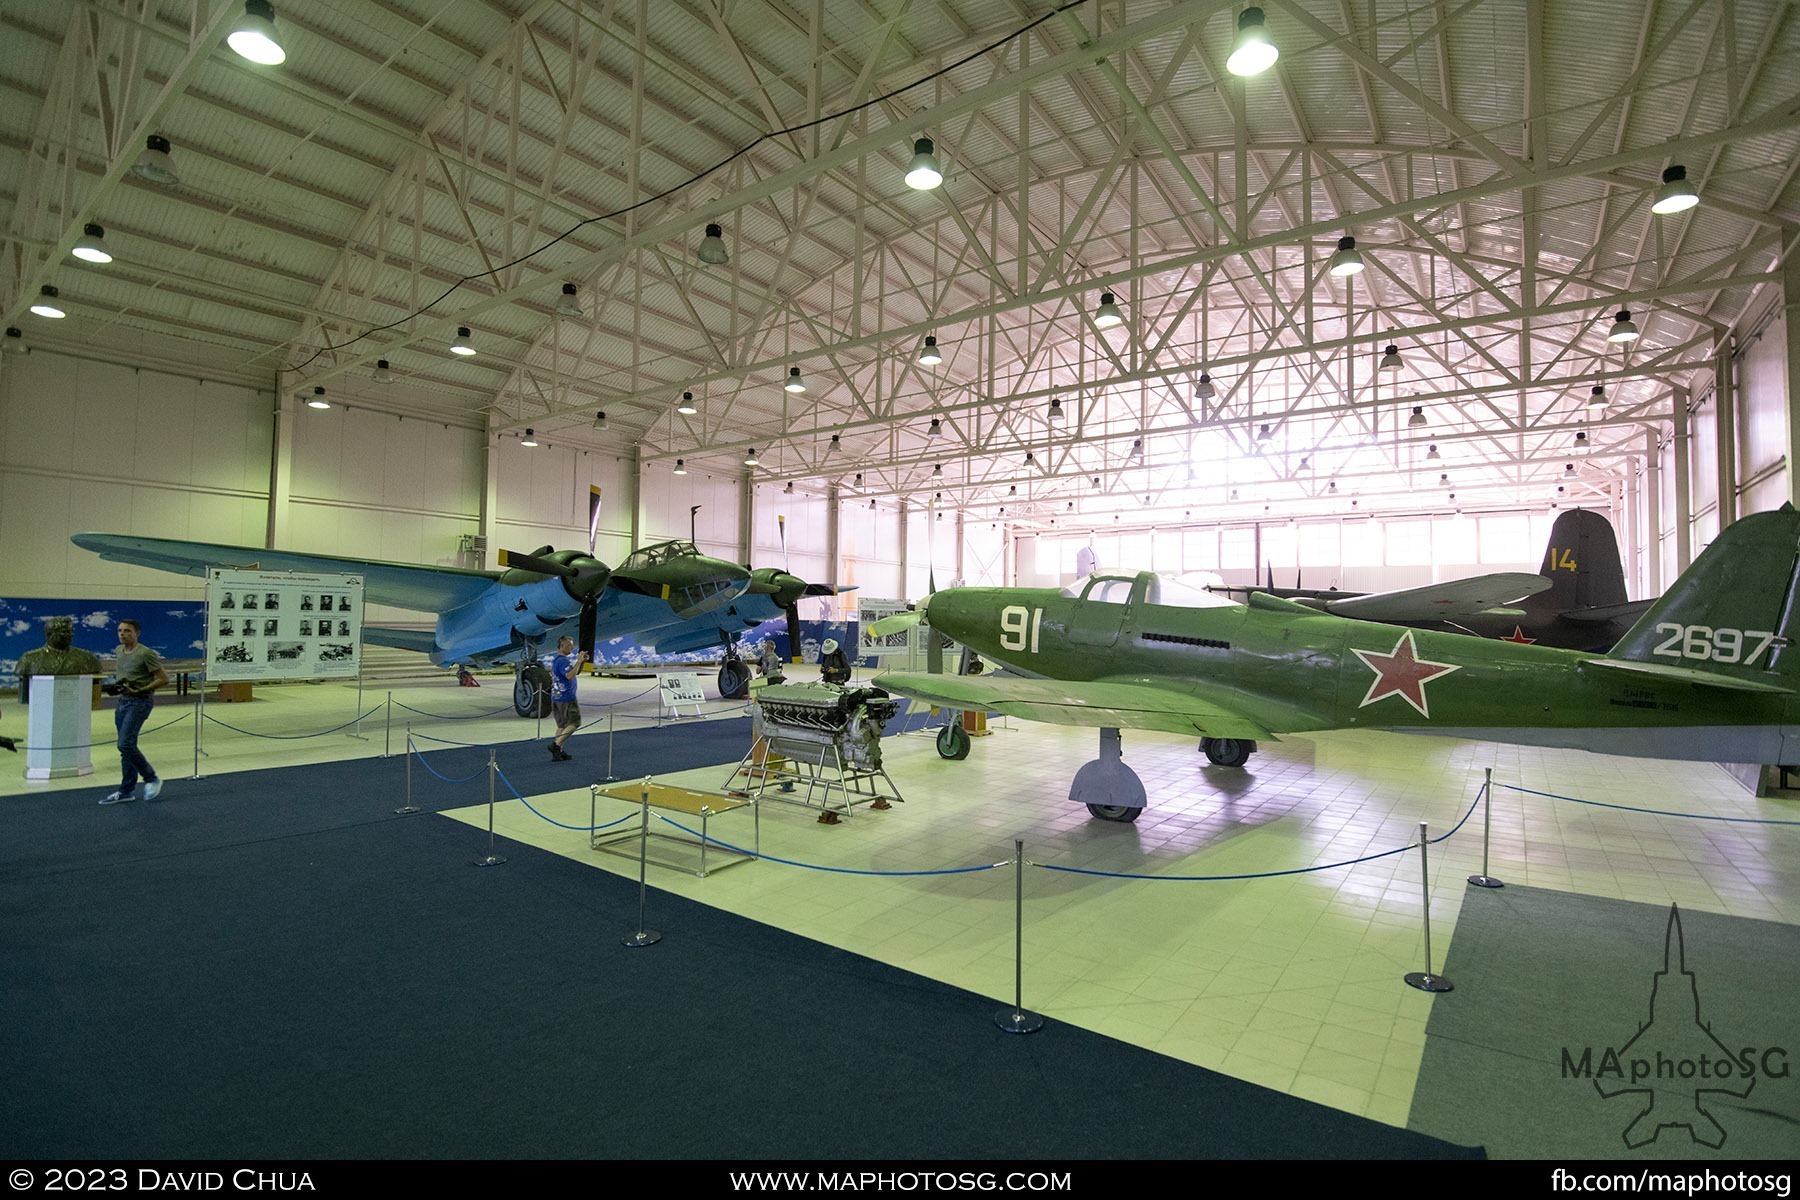 Great Patriotic War hanger of the Central Air Force Museum